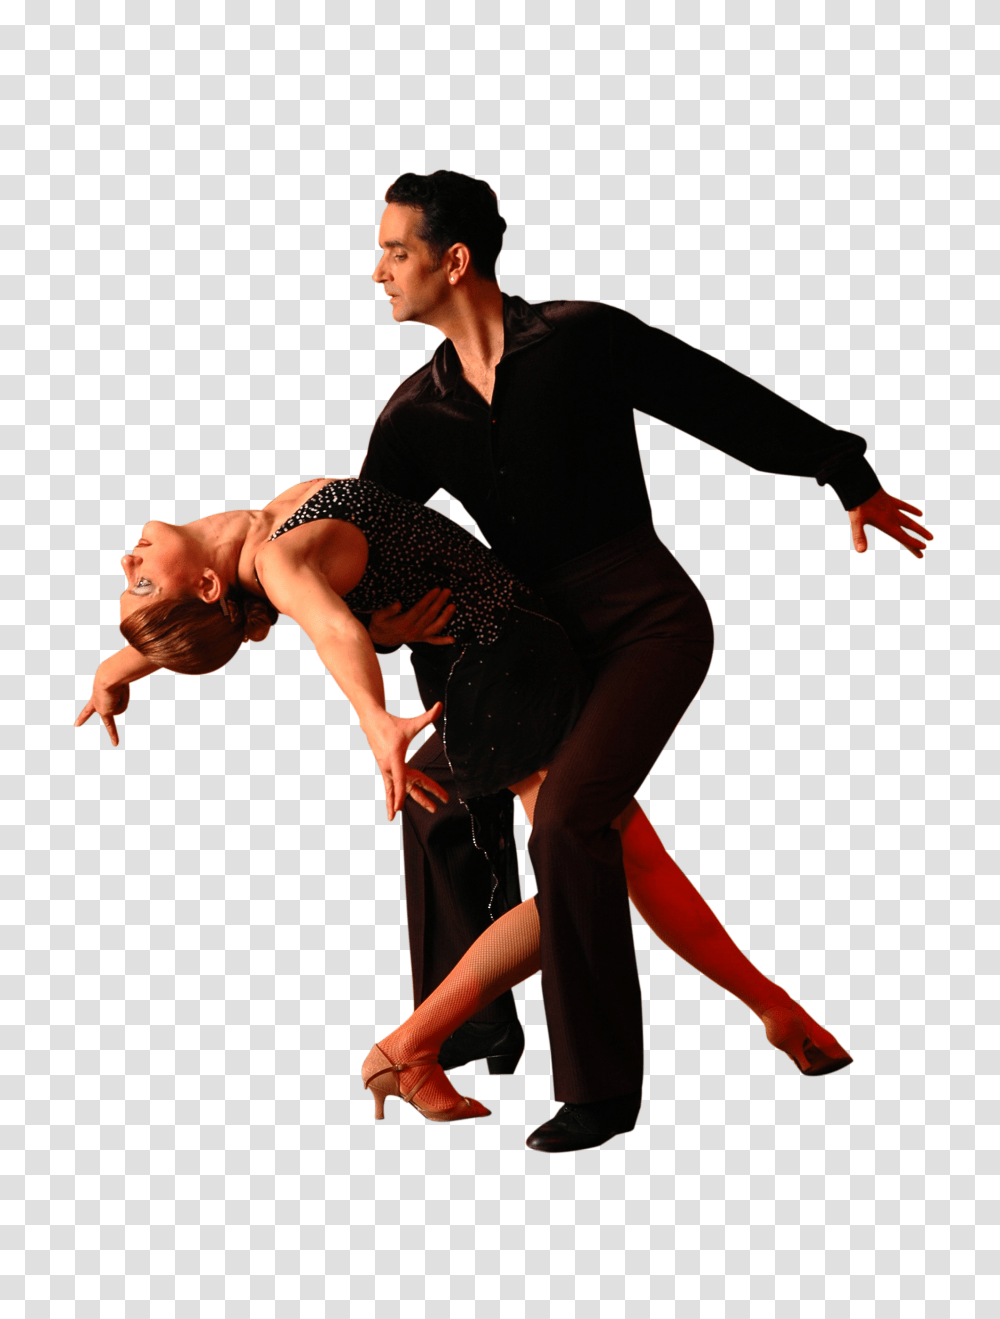 Dance, Dancing, Couple, Arts, Show, People, Pngs, Person, Dance Pose, Leisure Activities, Tango Transparent Png